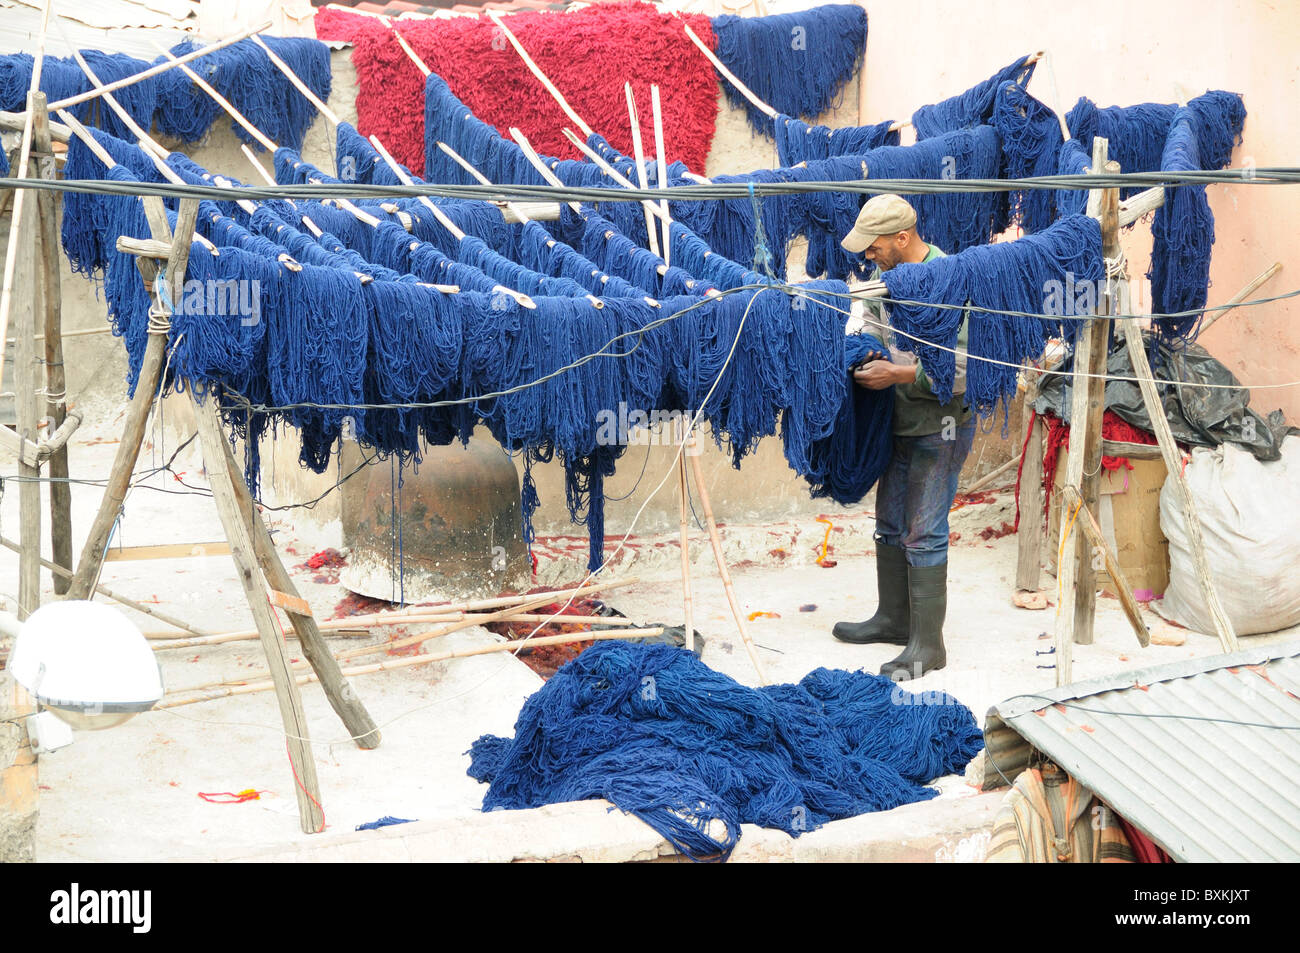 Dyer hanging dyed wools to dry at Souk Teinturiers in Marrakech Stock Photo